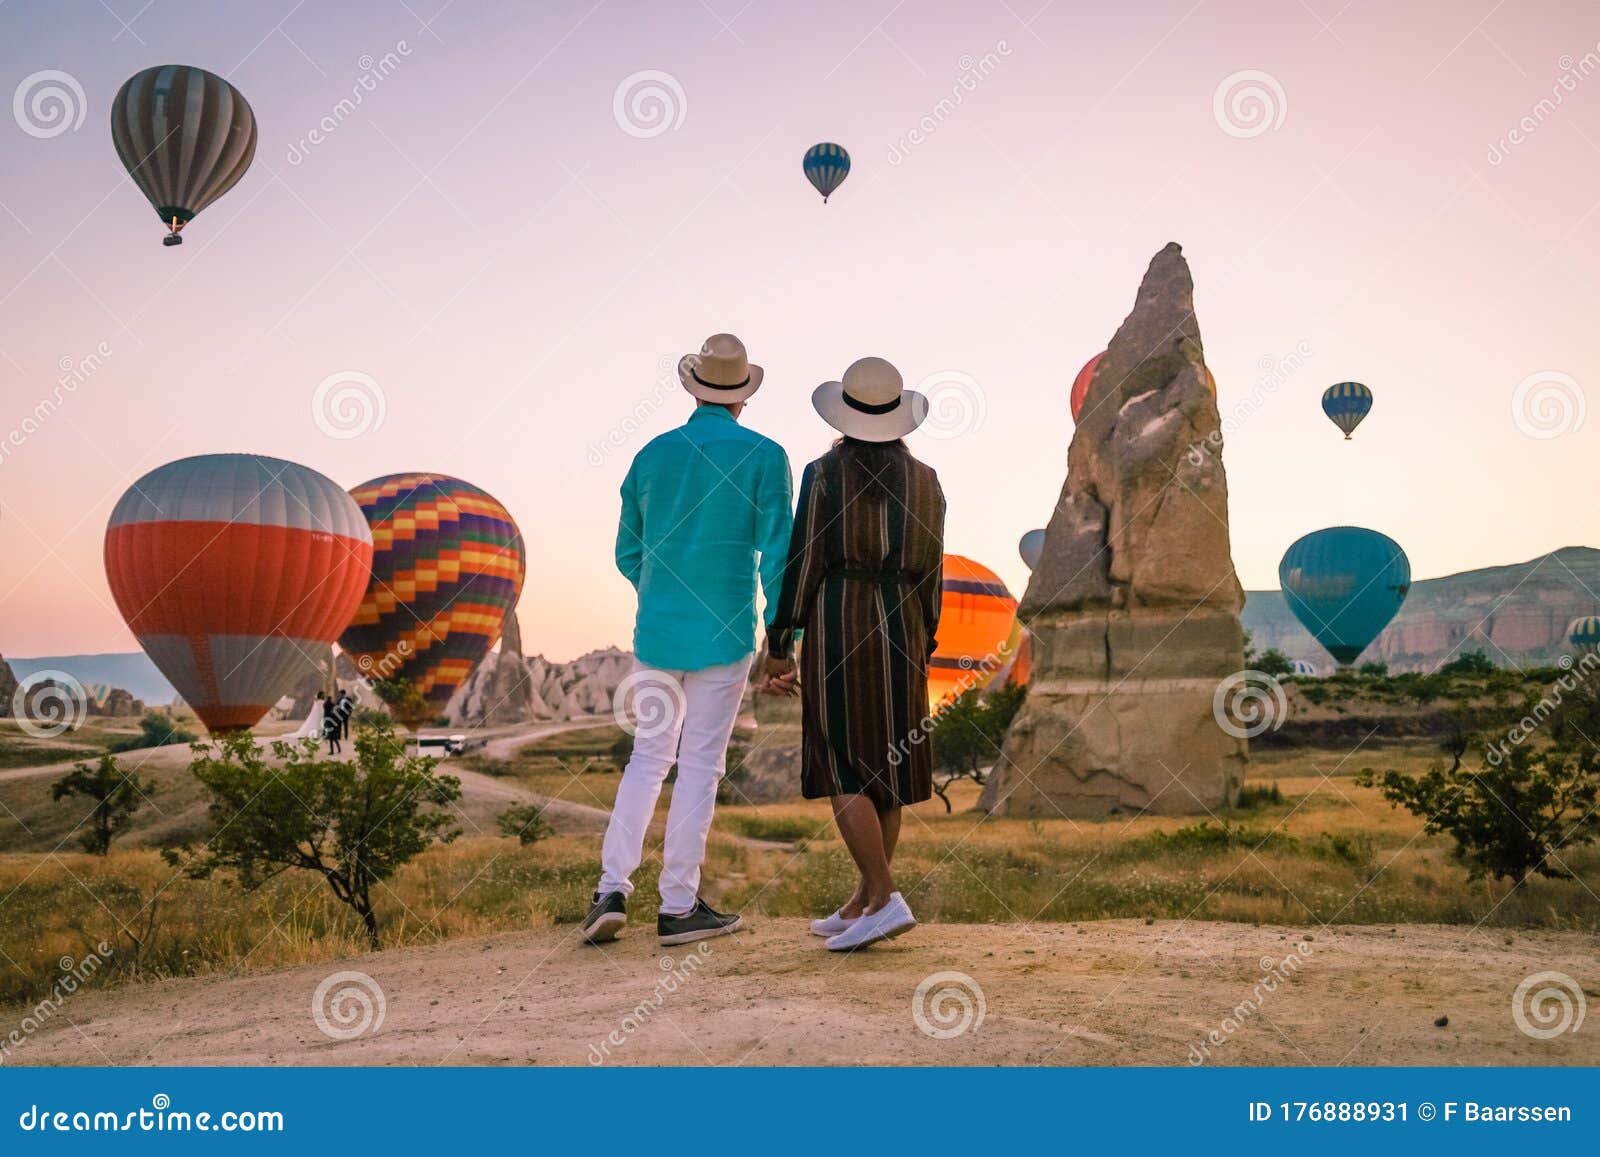 cappadocia turkey during sunrise, couple mid age men and woman on vacation in the hills of goreme capadocia turkey, men